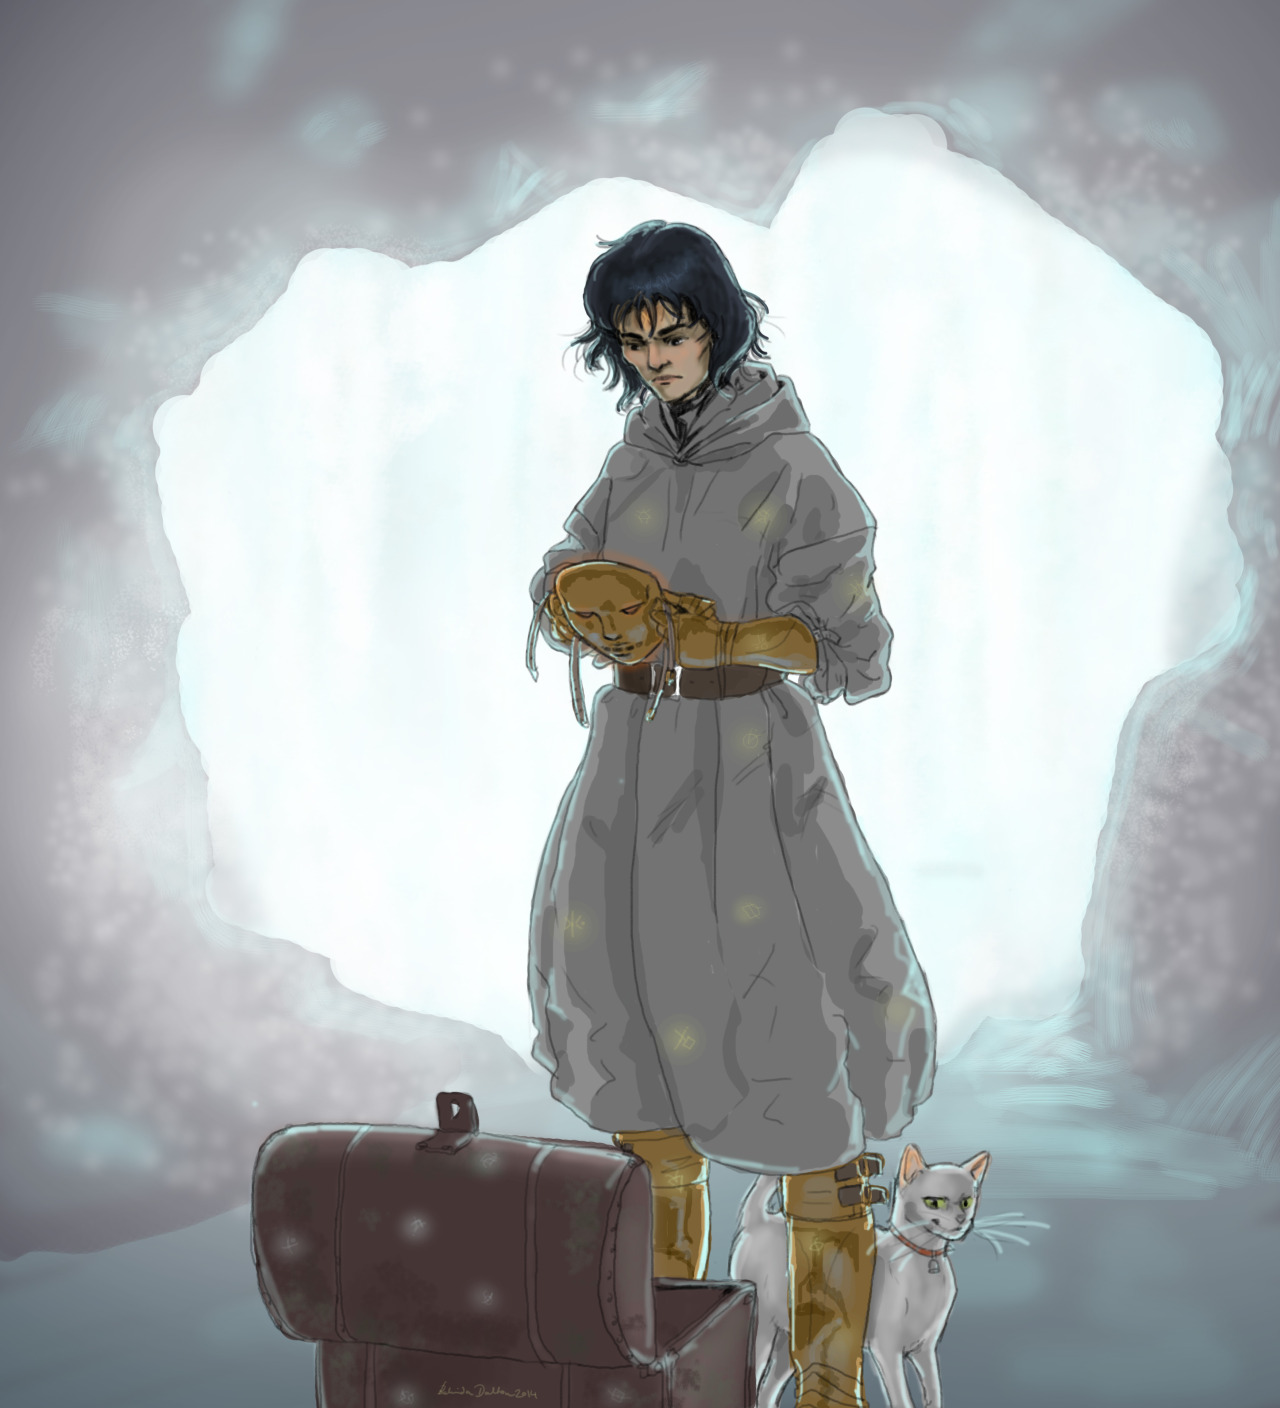 loloraturasopranerd:
“I just finished reading Garth Nix’s new one, Clariel. OH MY GOD WAS IT GOOD. More please. Because I’m totally obsessed, have some fan art of Clariel and Mogget unpacking the Free Magic accoutrements in the cave behind the...